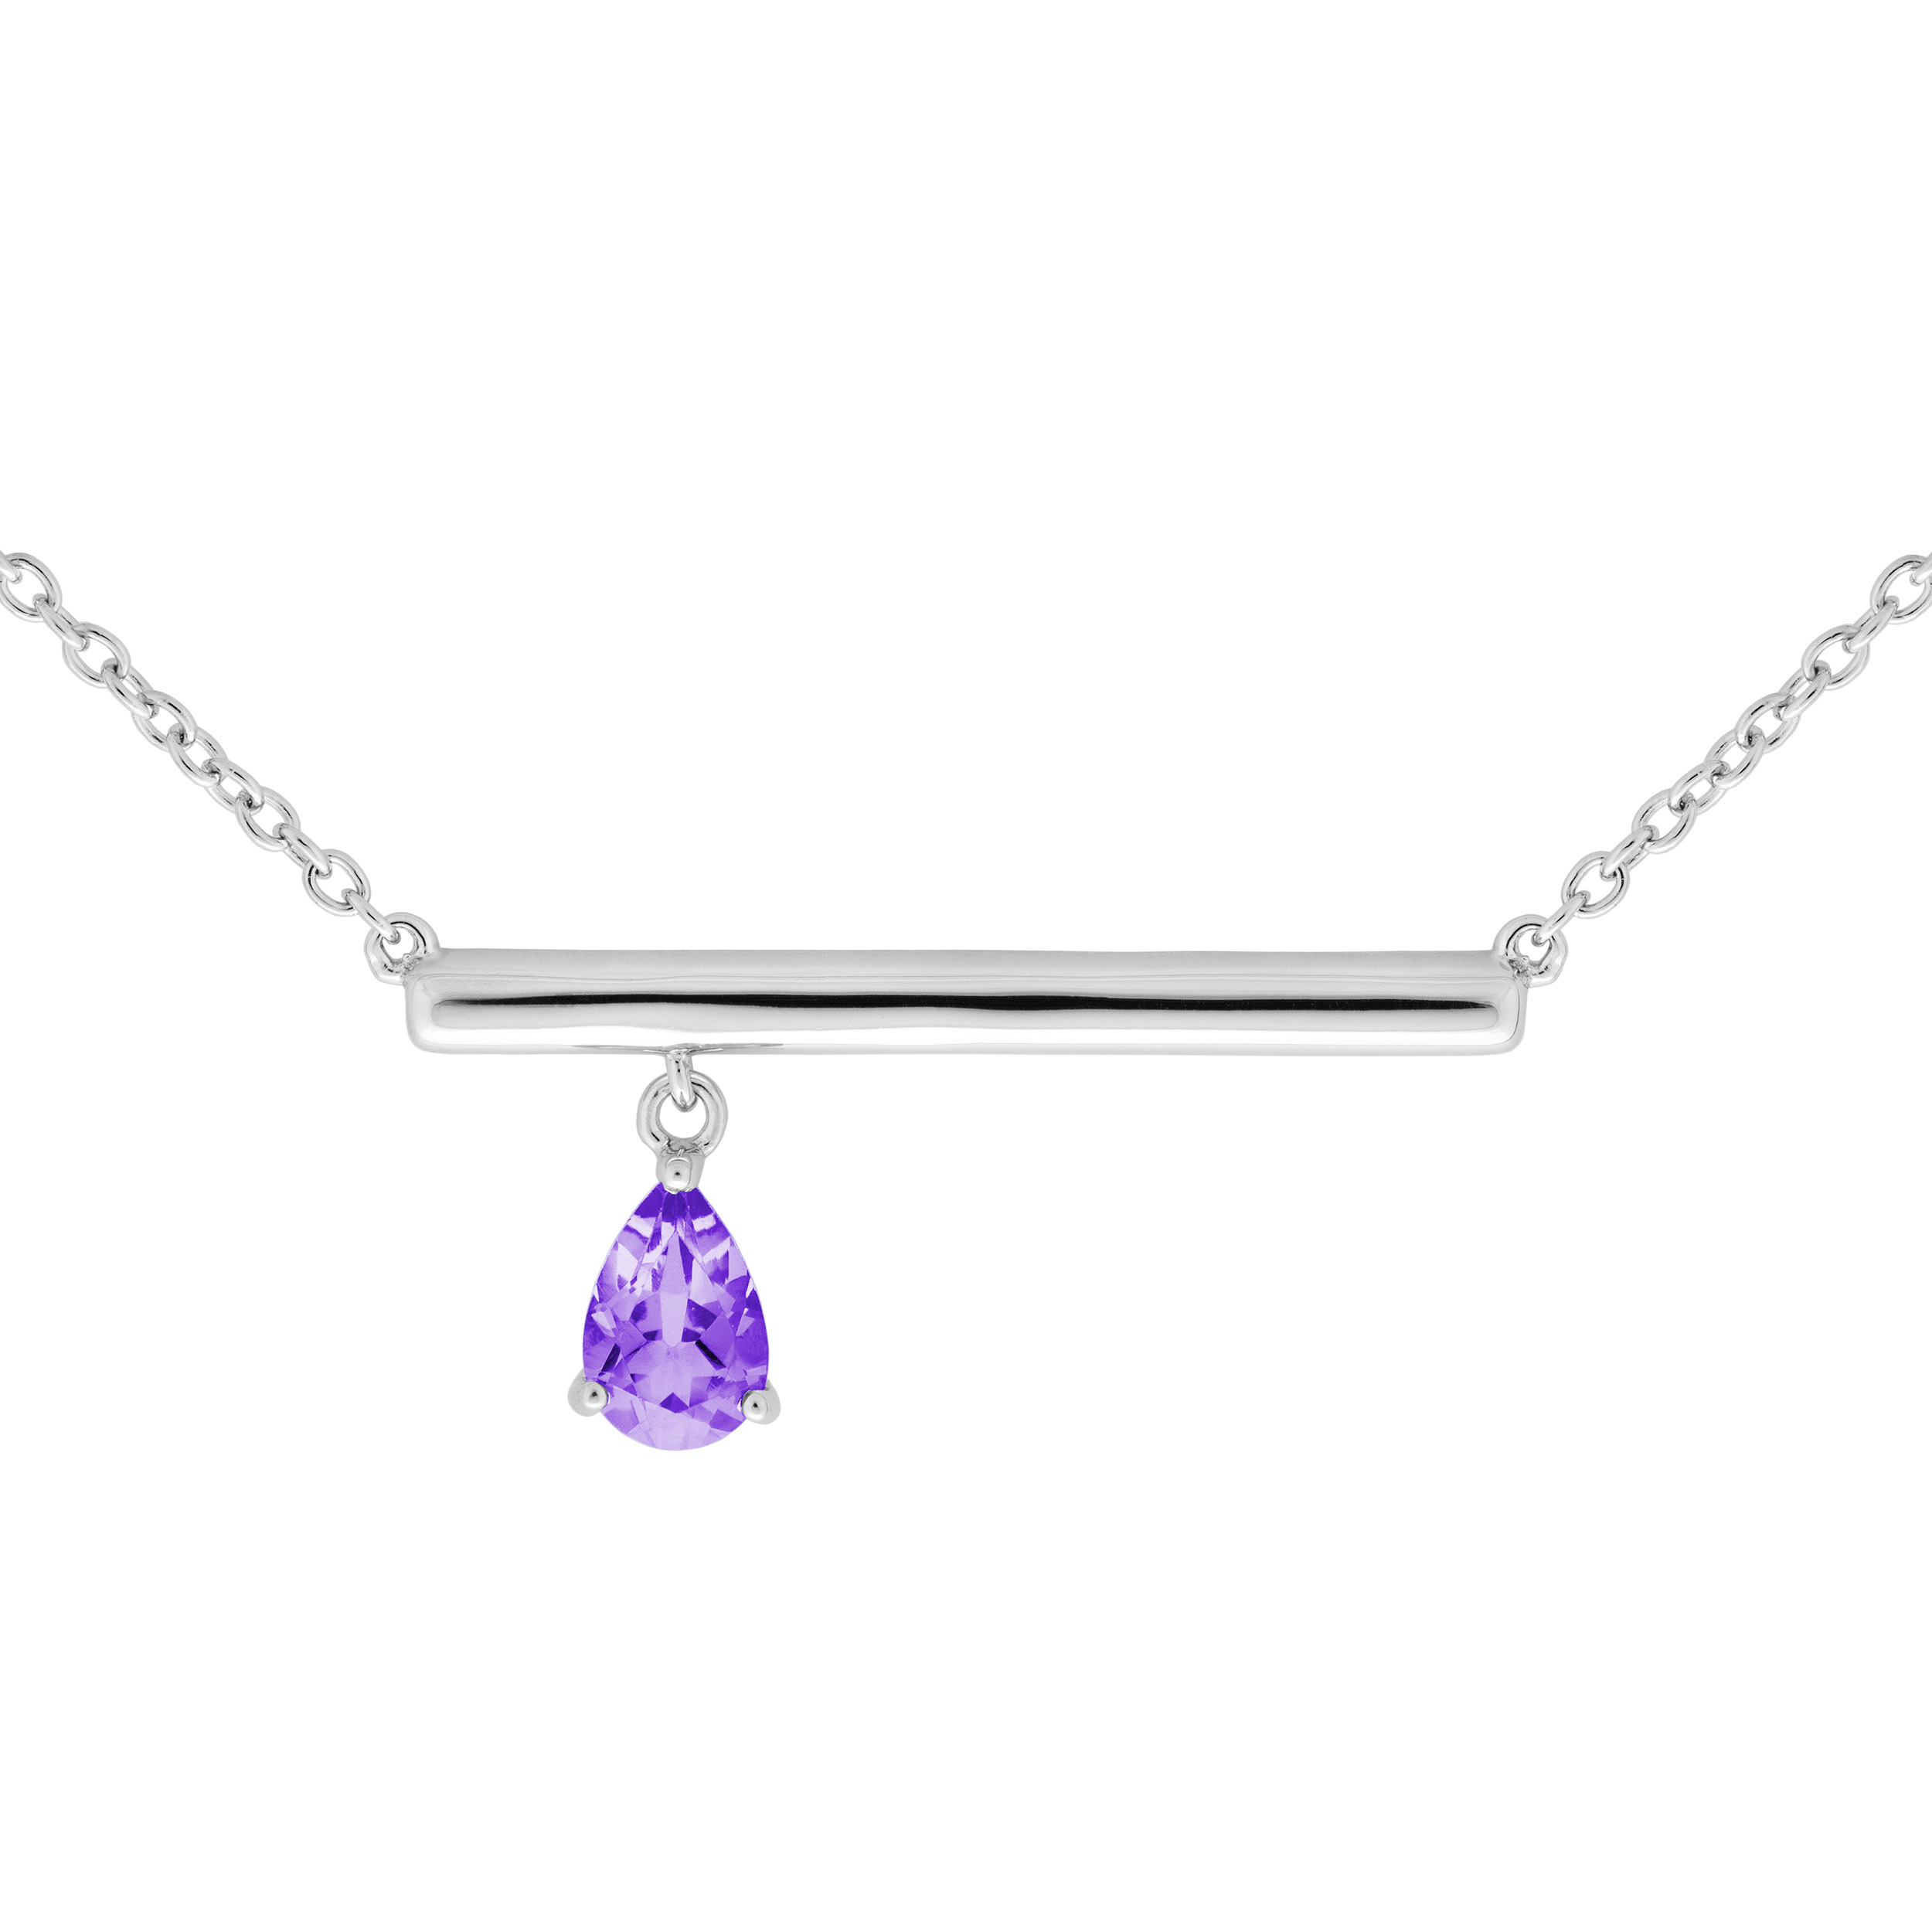 Pear Brazillian Amethyst Pendant Necklace, Rhodium Plated Sterling Silver